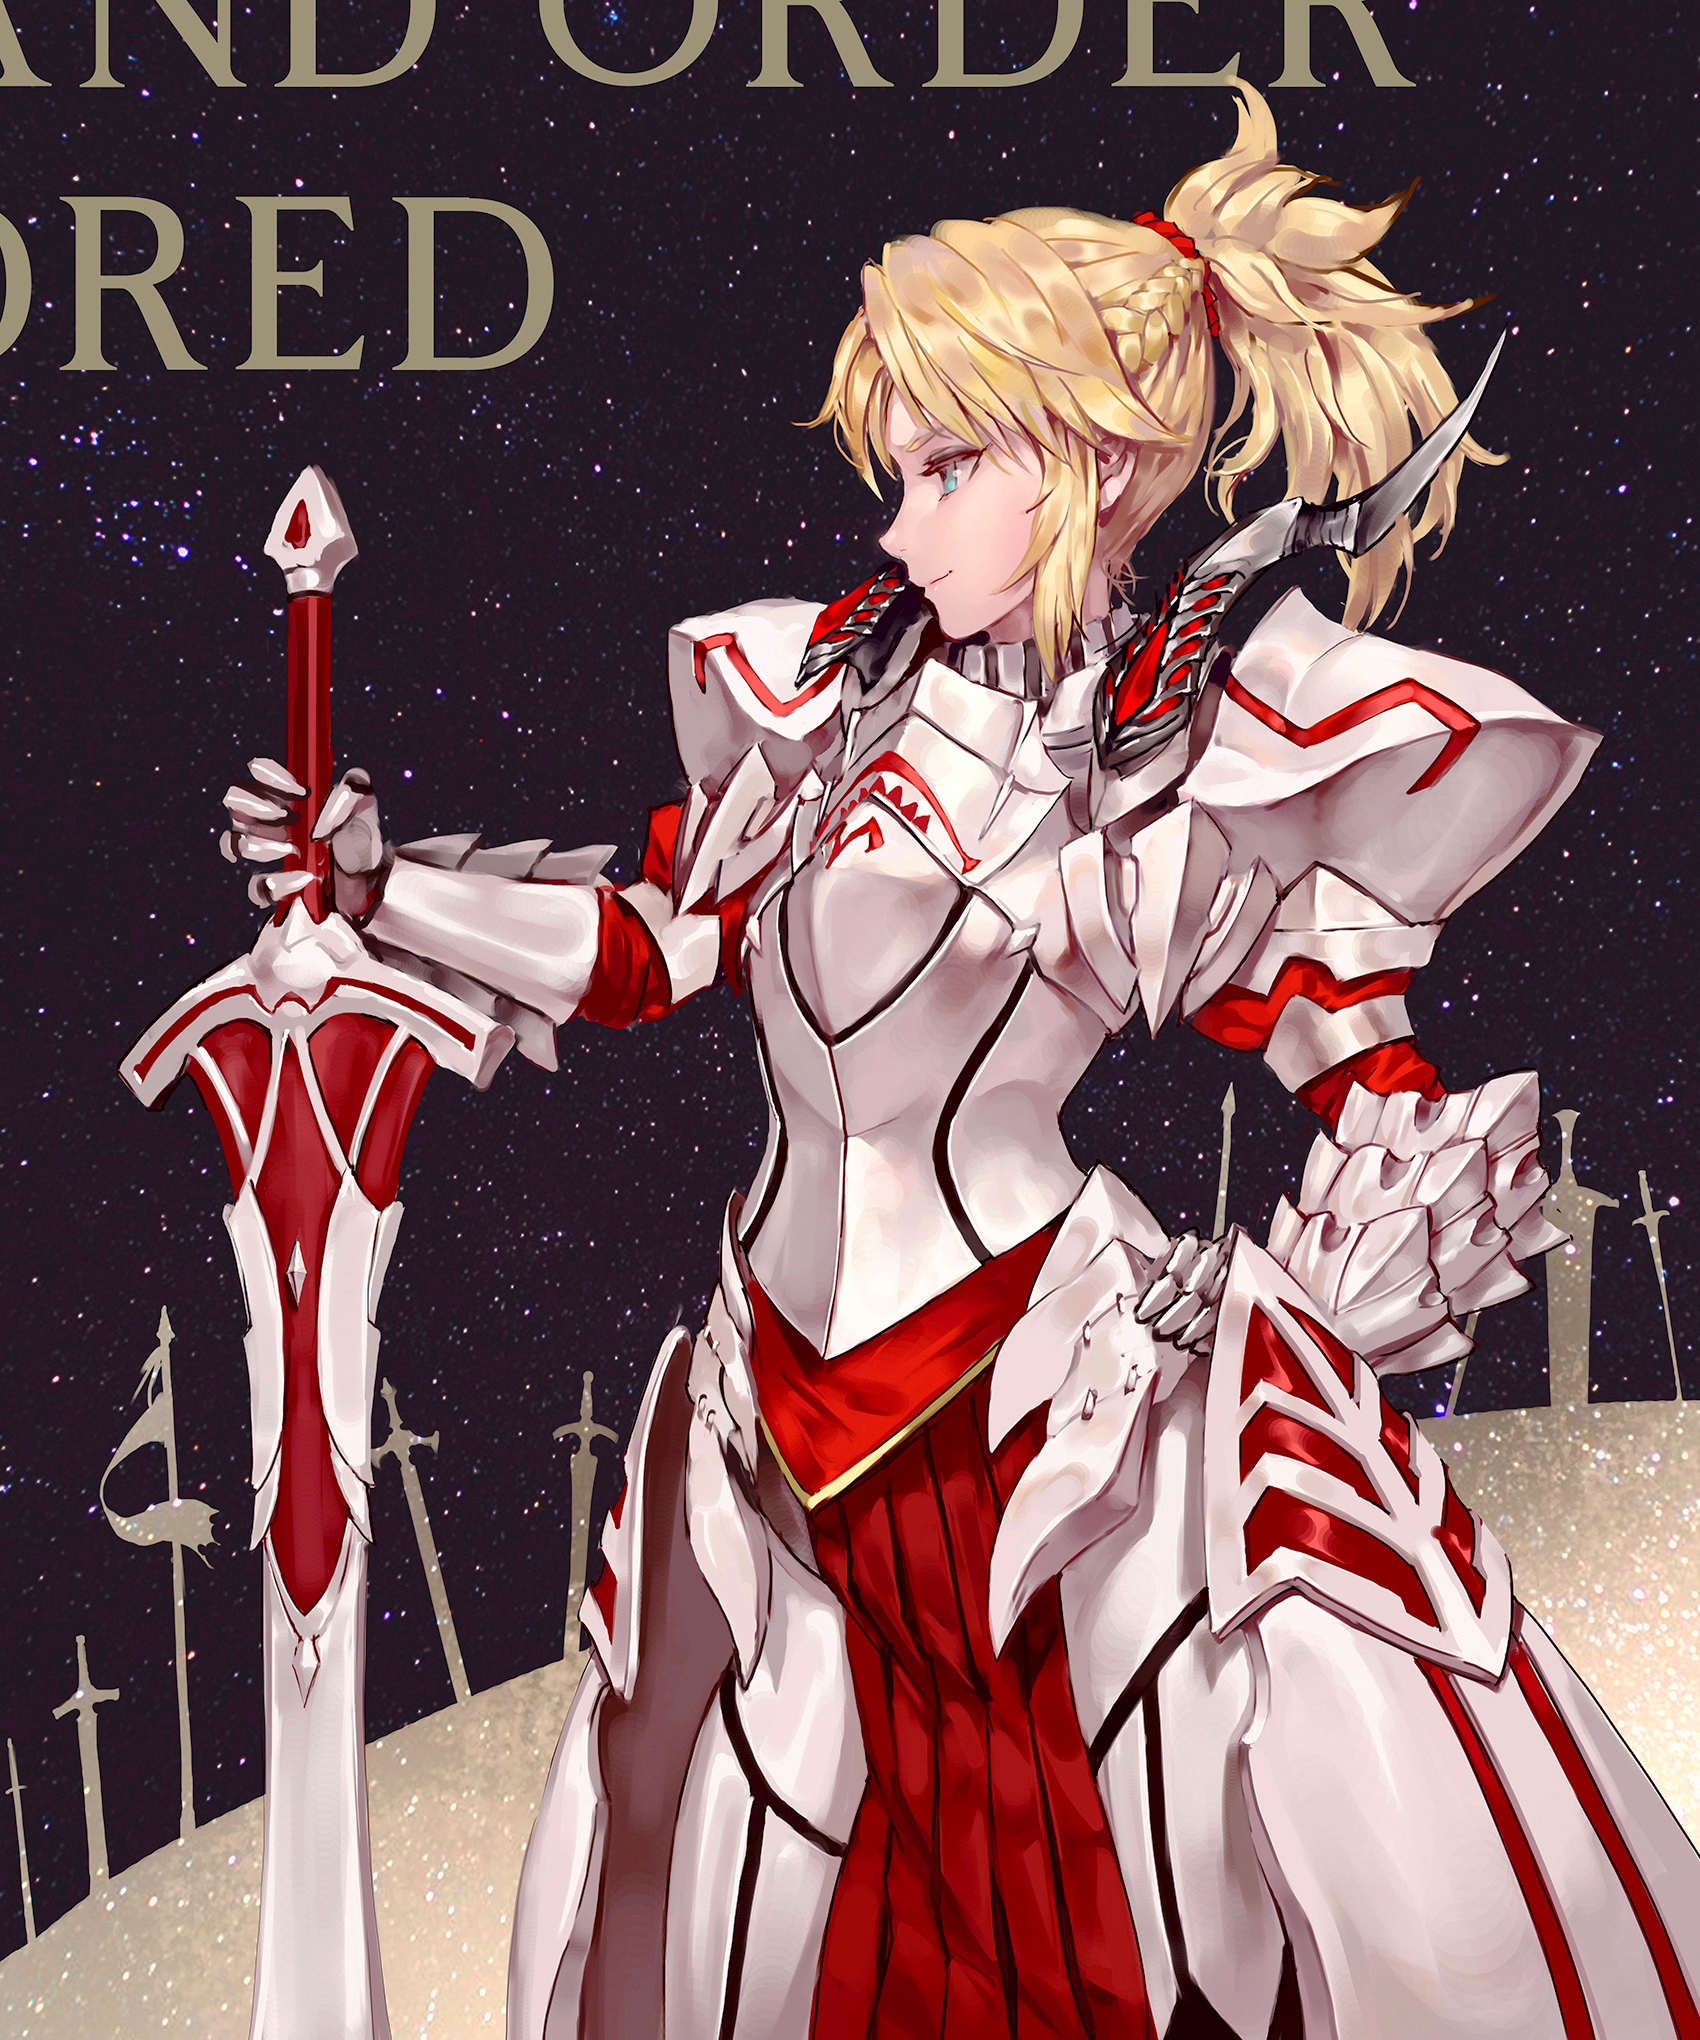 Fate Series FGO Fate Apocrypha Anime Girls Armor Long Hair Blond Hair 2D Ponytail Women With Swords  1700x2040